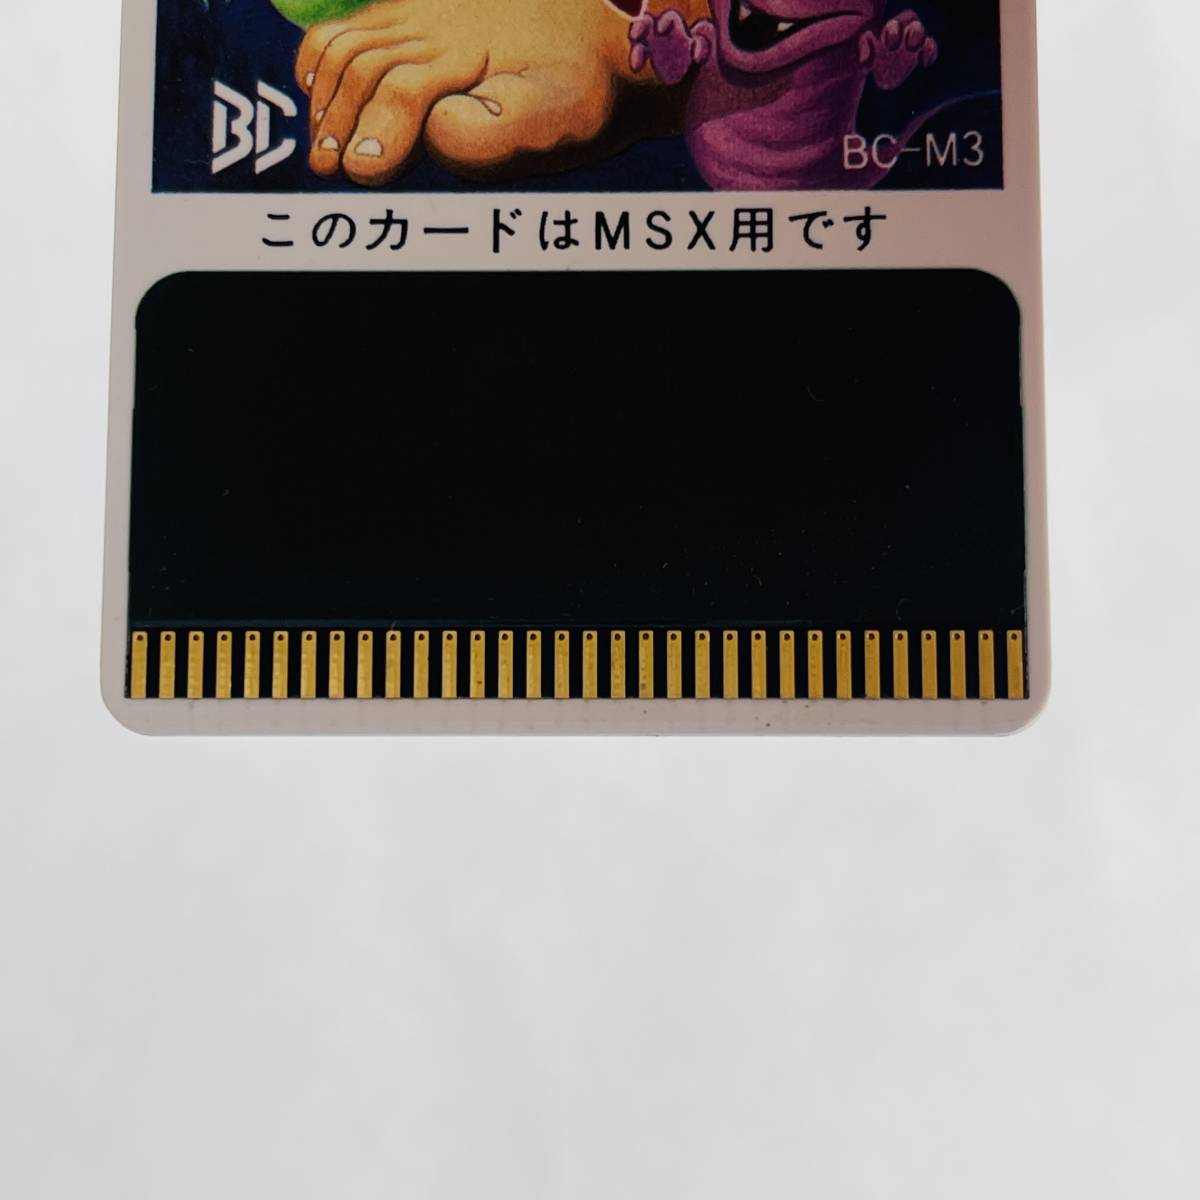 MSX BEE CARD ジェット セット ウィリー A11 JET SET WILLY BC-M3 ビーカード ハドソン ソフト _画像4